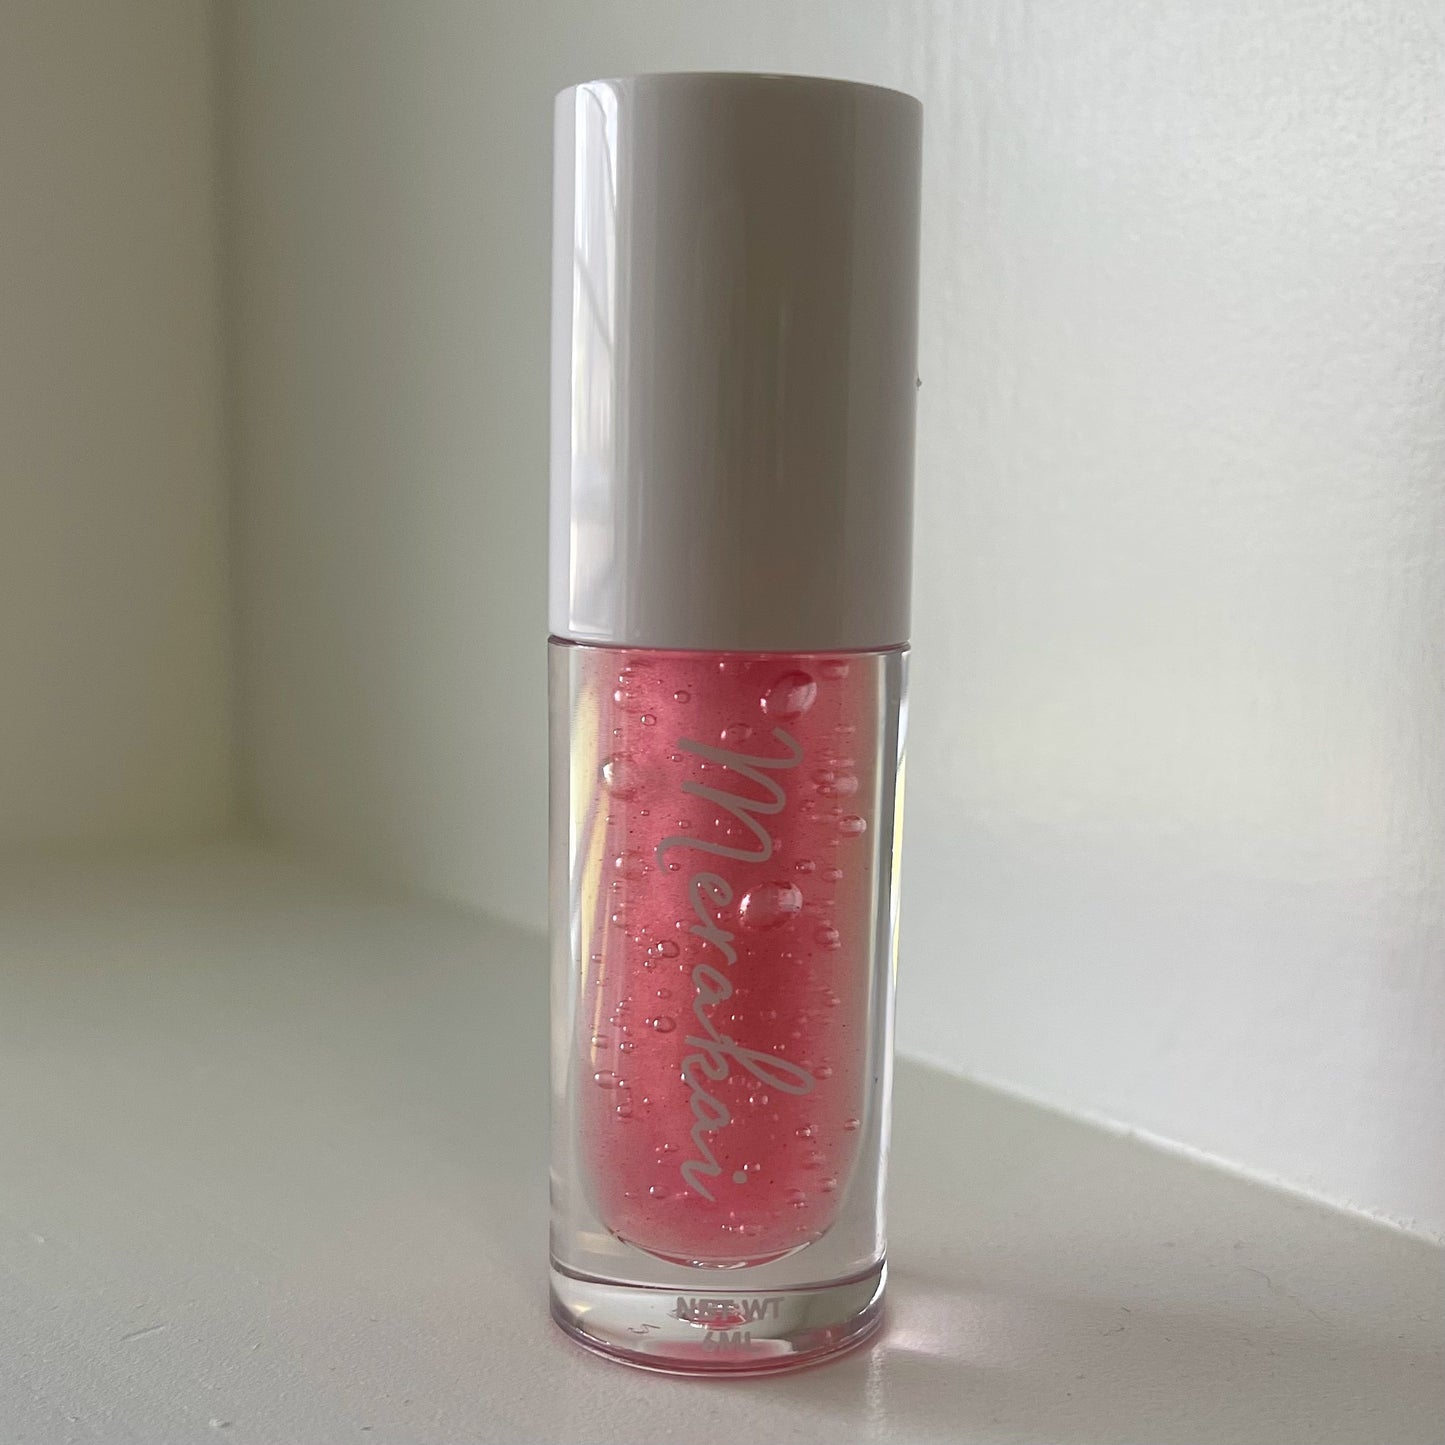 Yours Truly: The Valentine's Day Collection Be Mine Moisturizing Lip Gloss